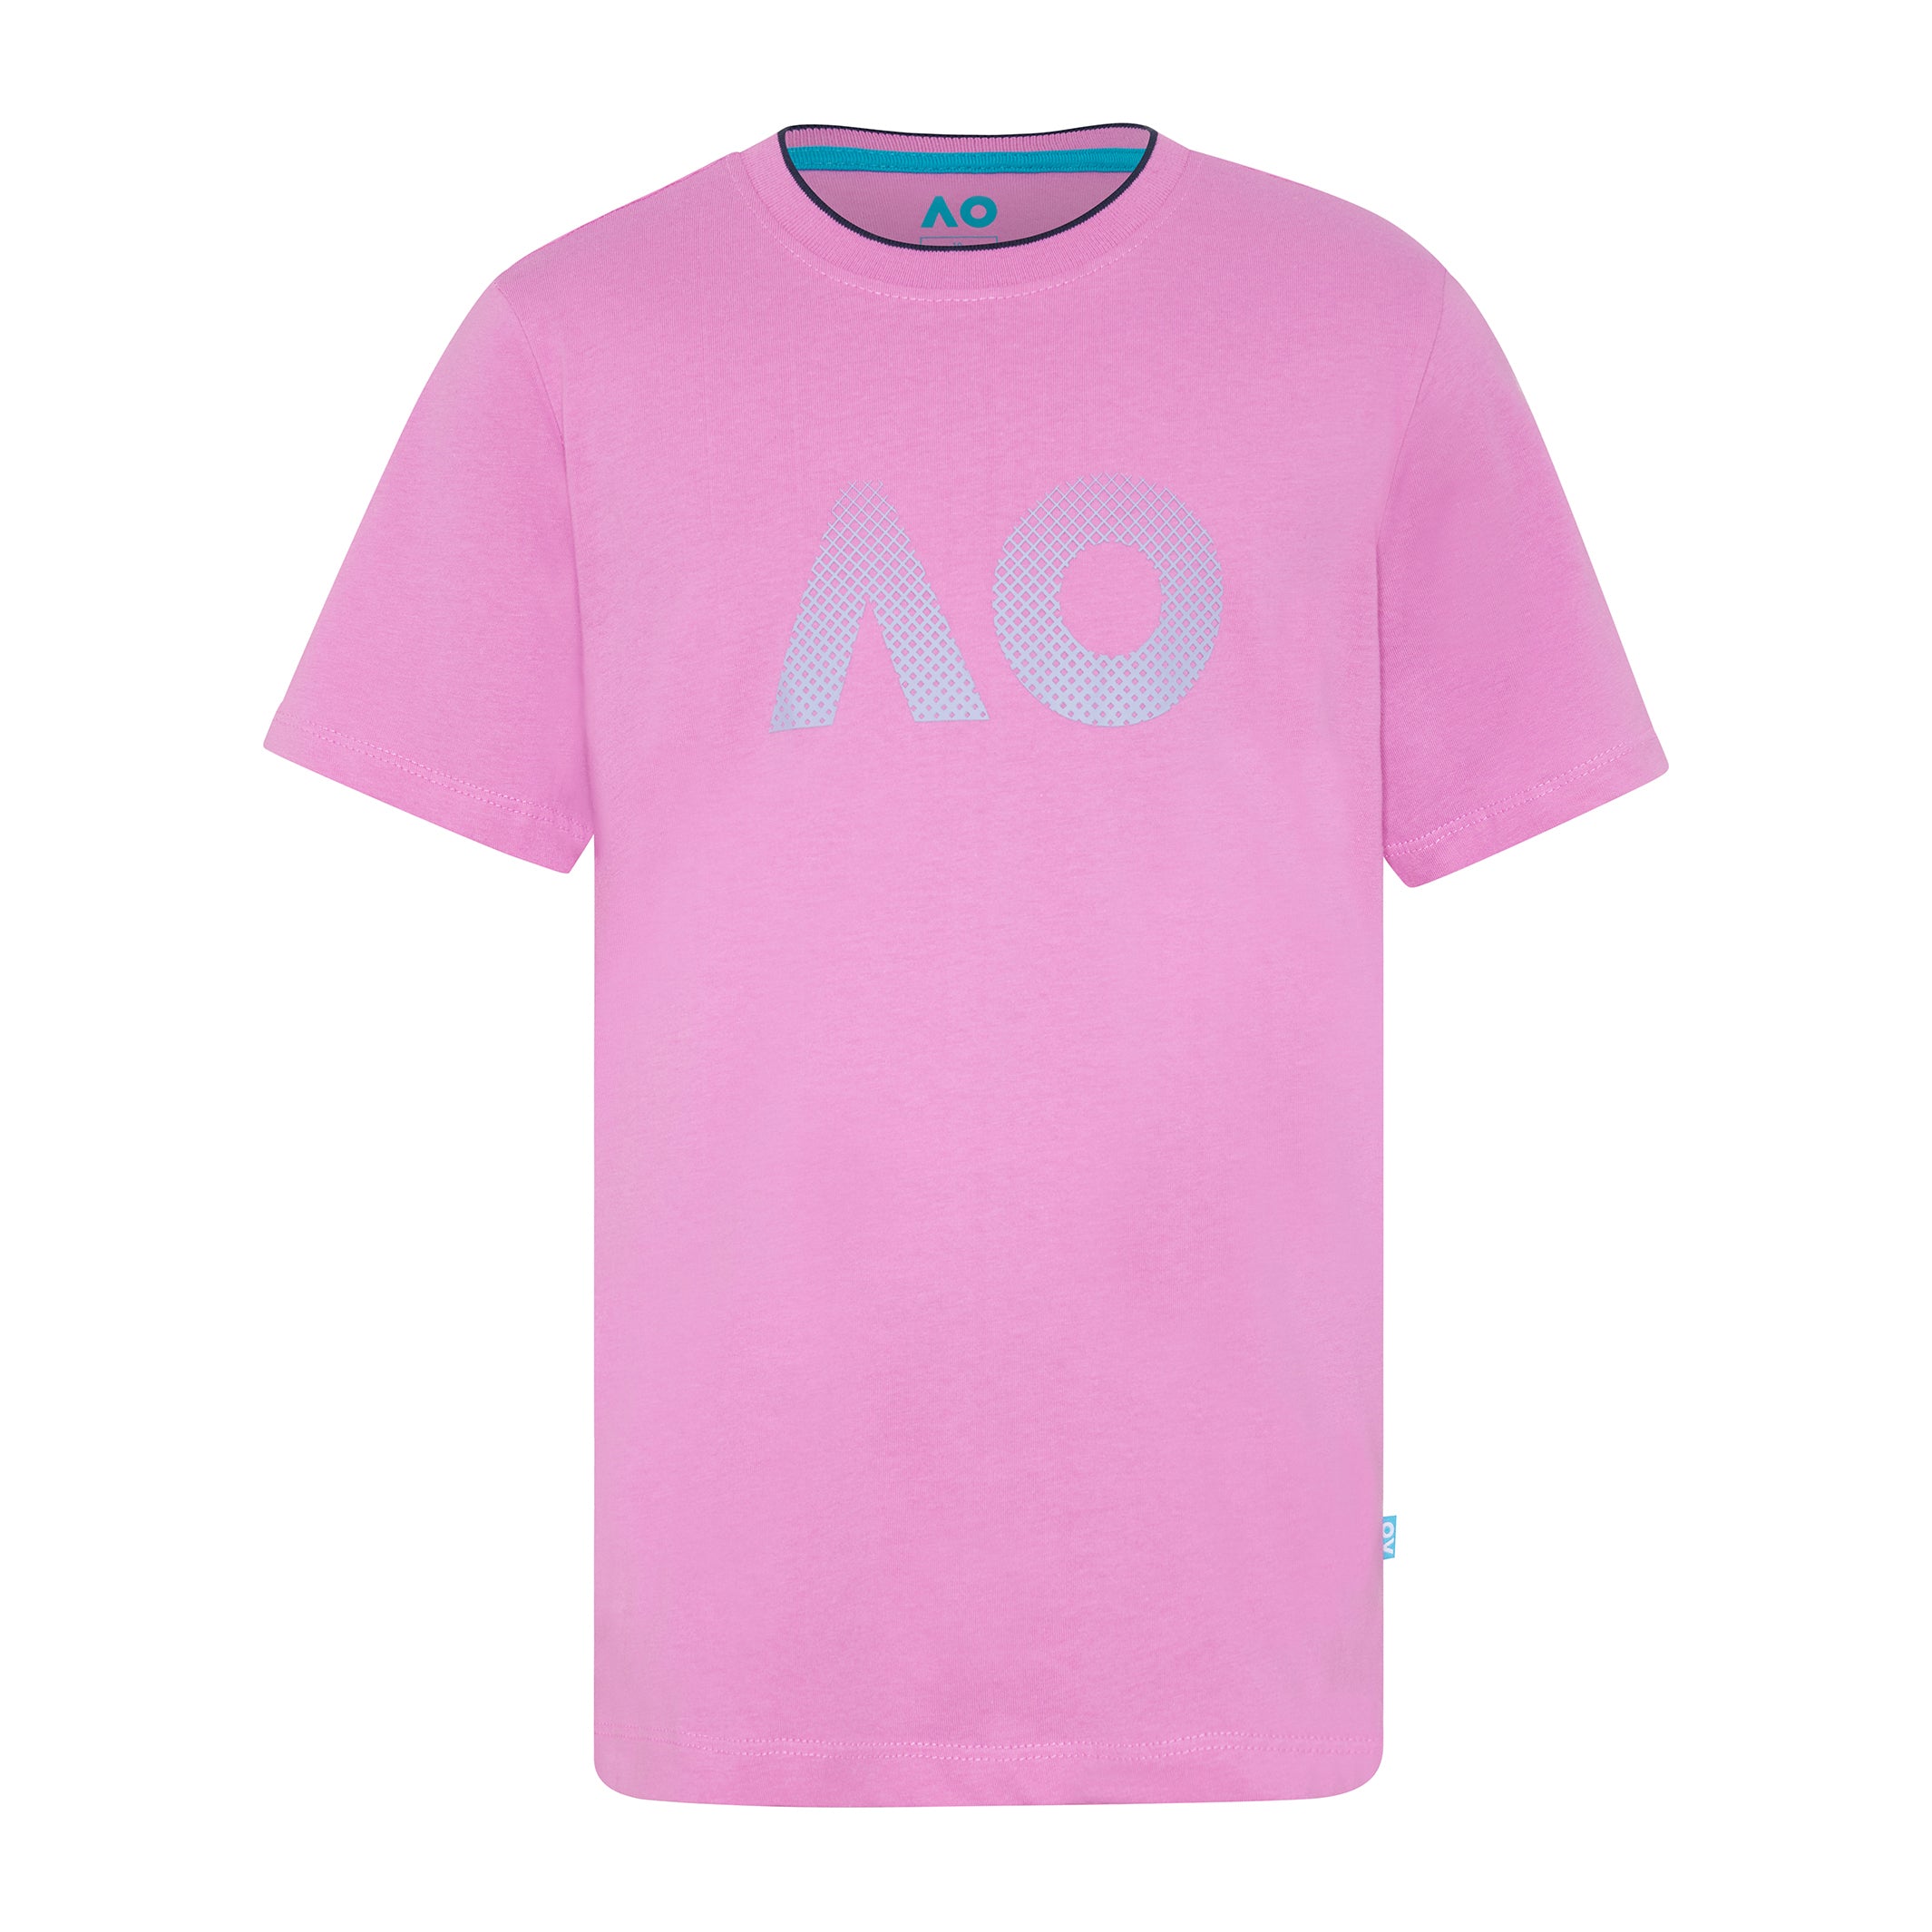 Kid's Unisex Pink T-Shirt AO Textured Logo Front View